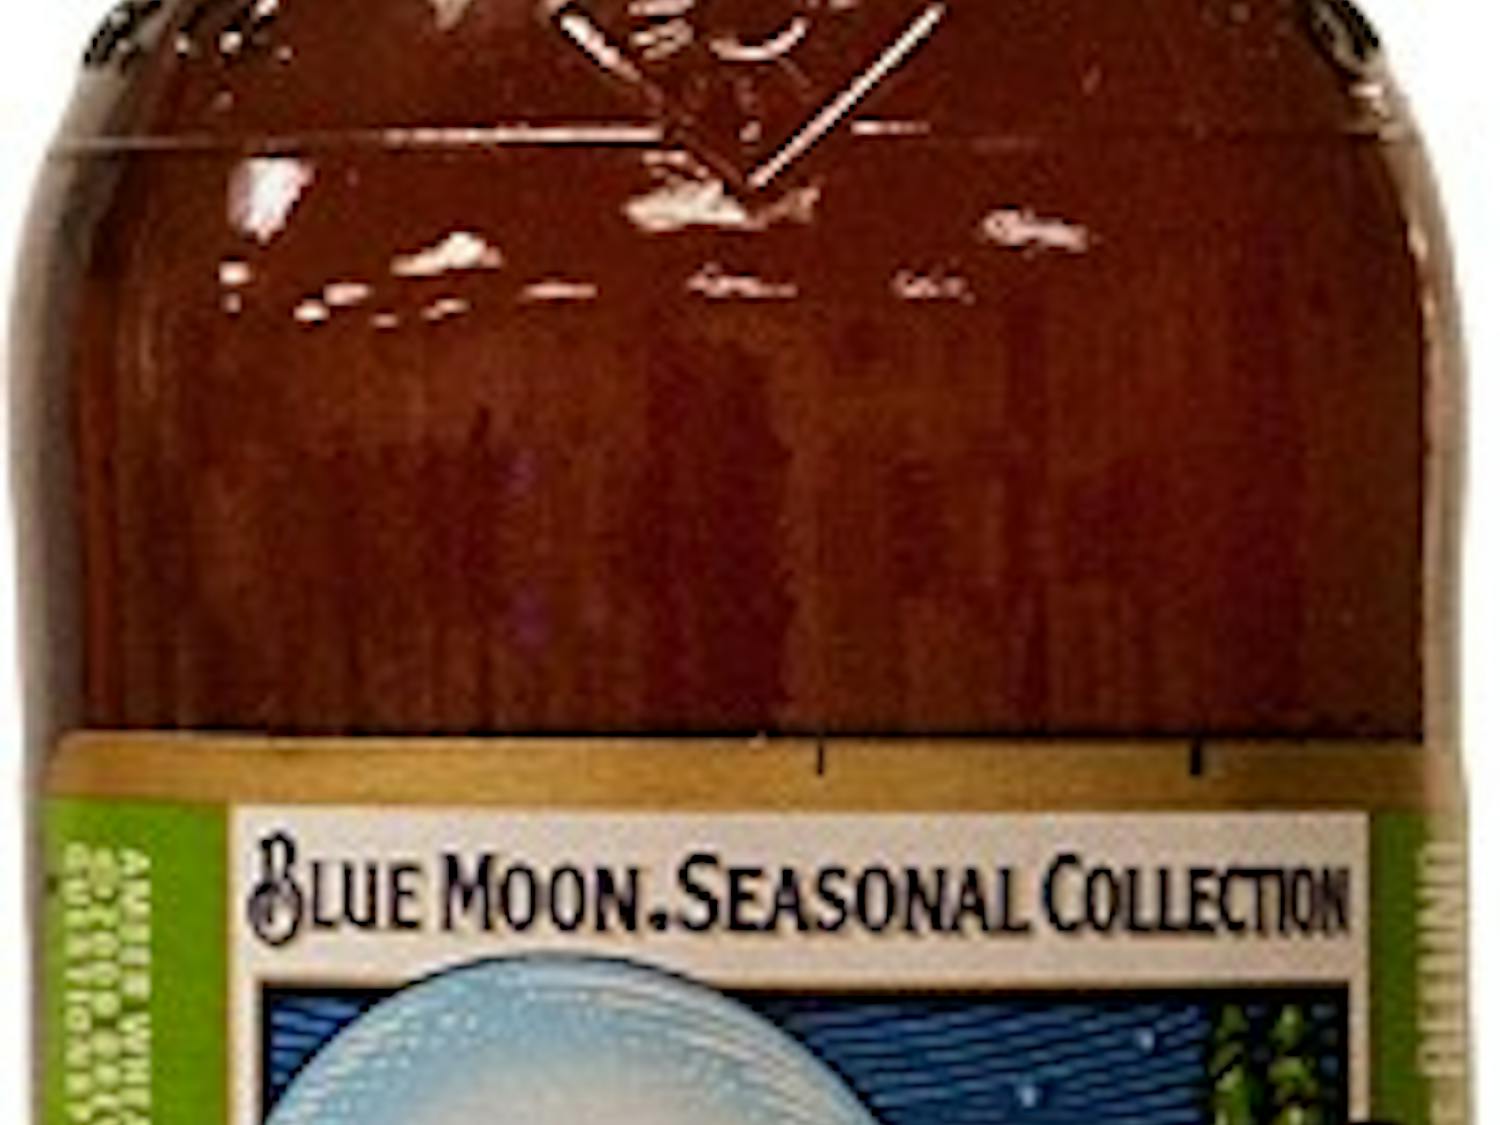 New Beer Thursday--Rising Moon Spring Ale